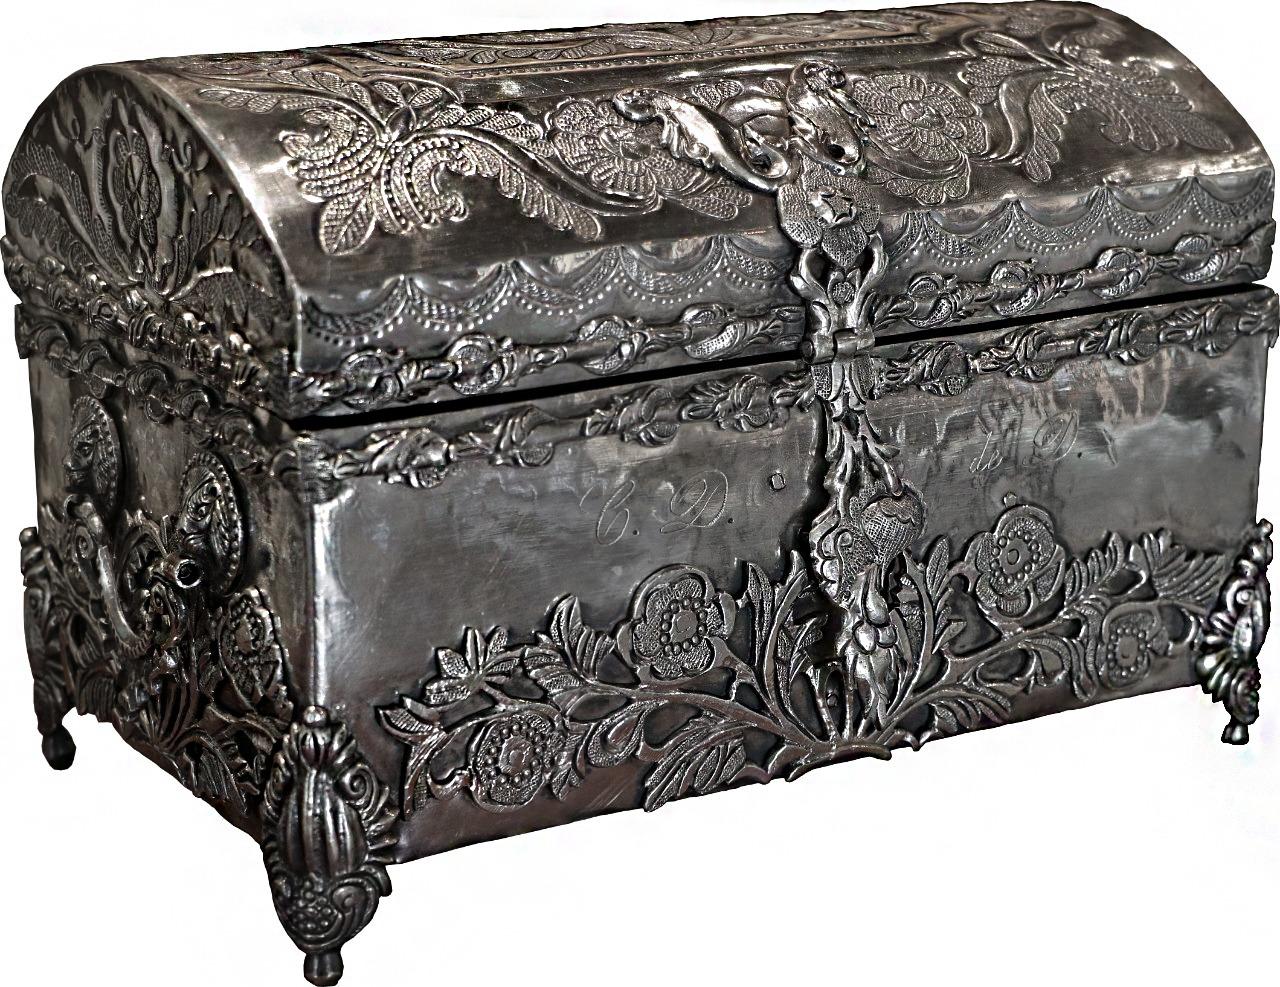 Viceregal Chiseled Silver Casket, Decorated with Organic Motifs In Good Condition For Sale In Mexico City, MX